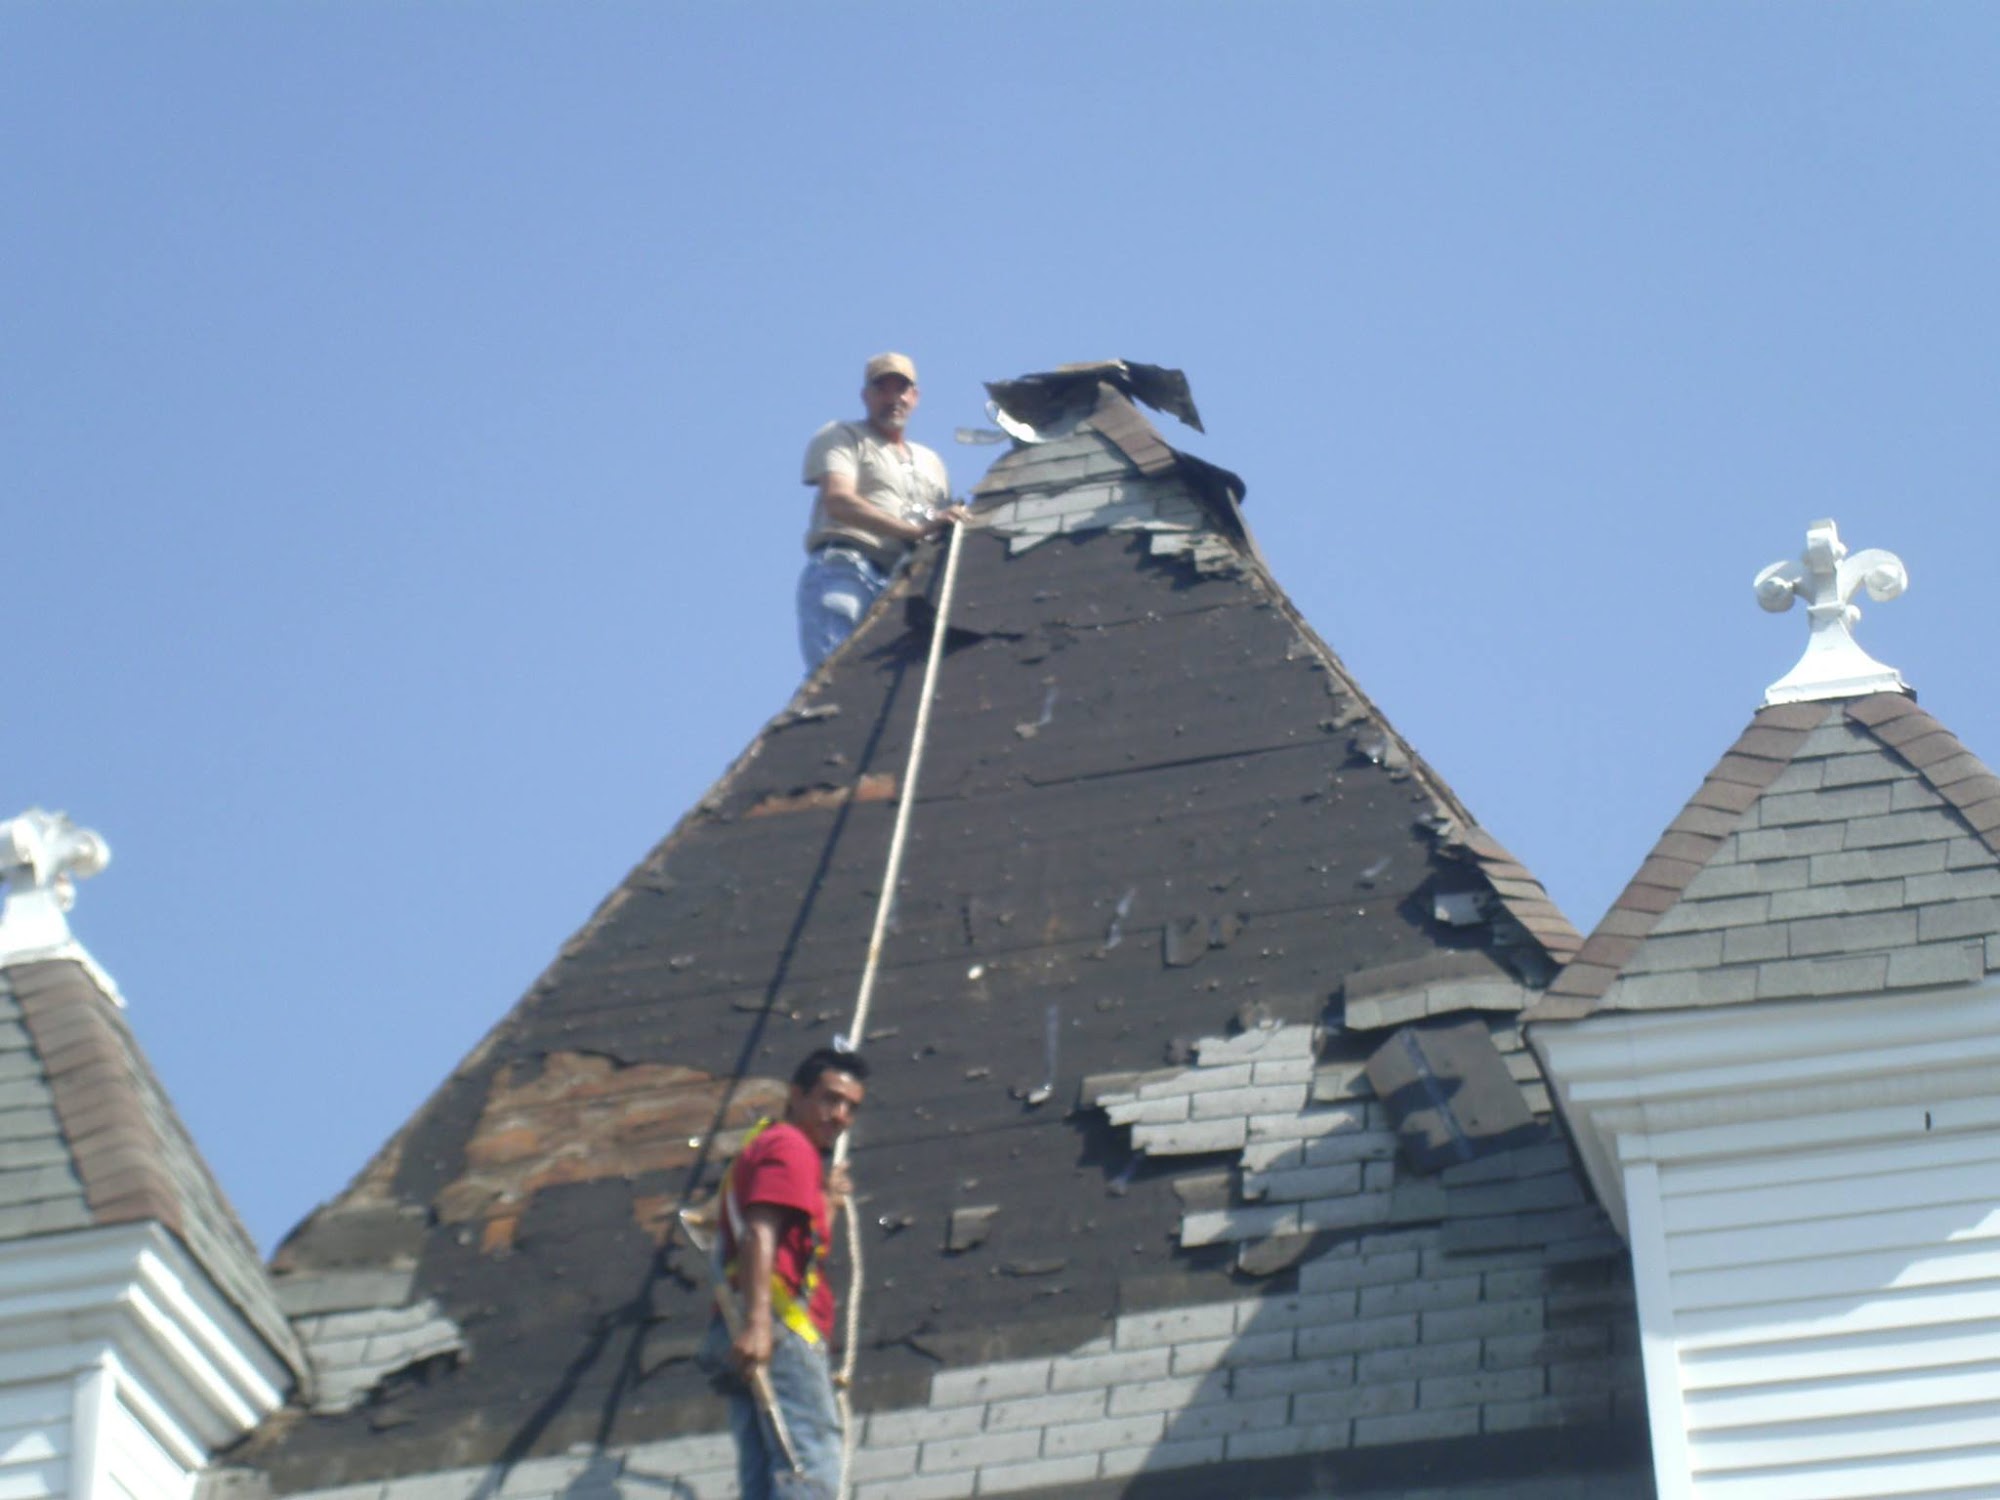 South Roofing and Contracting LLC 1704 W Main St, Independence Kansas 67301